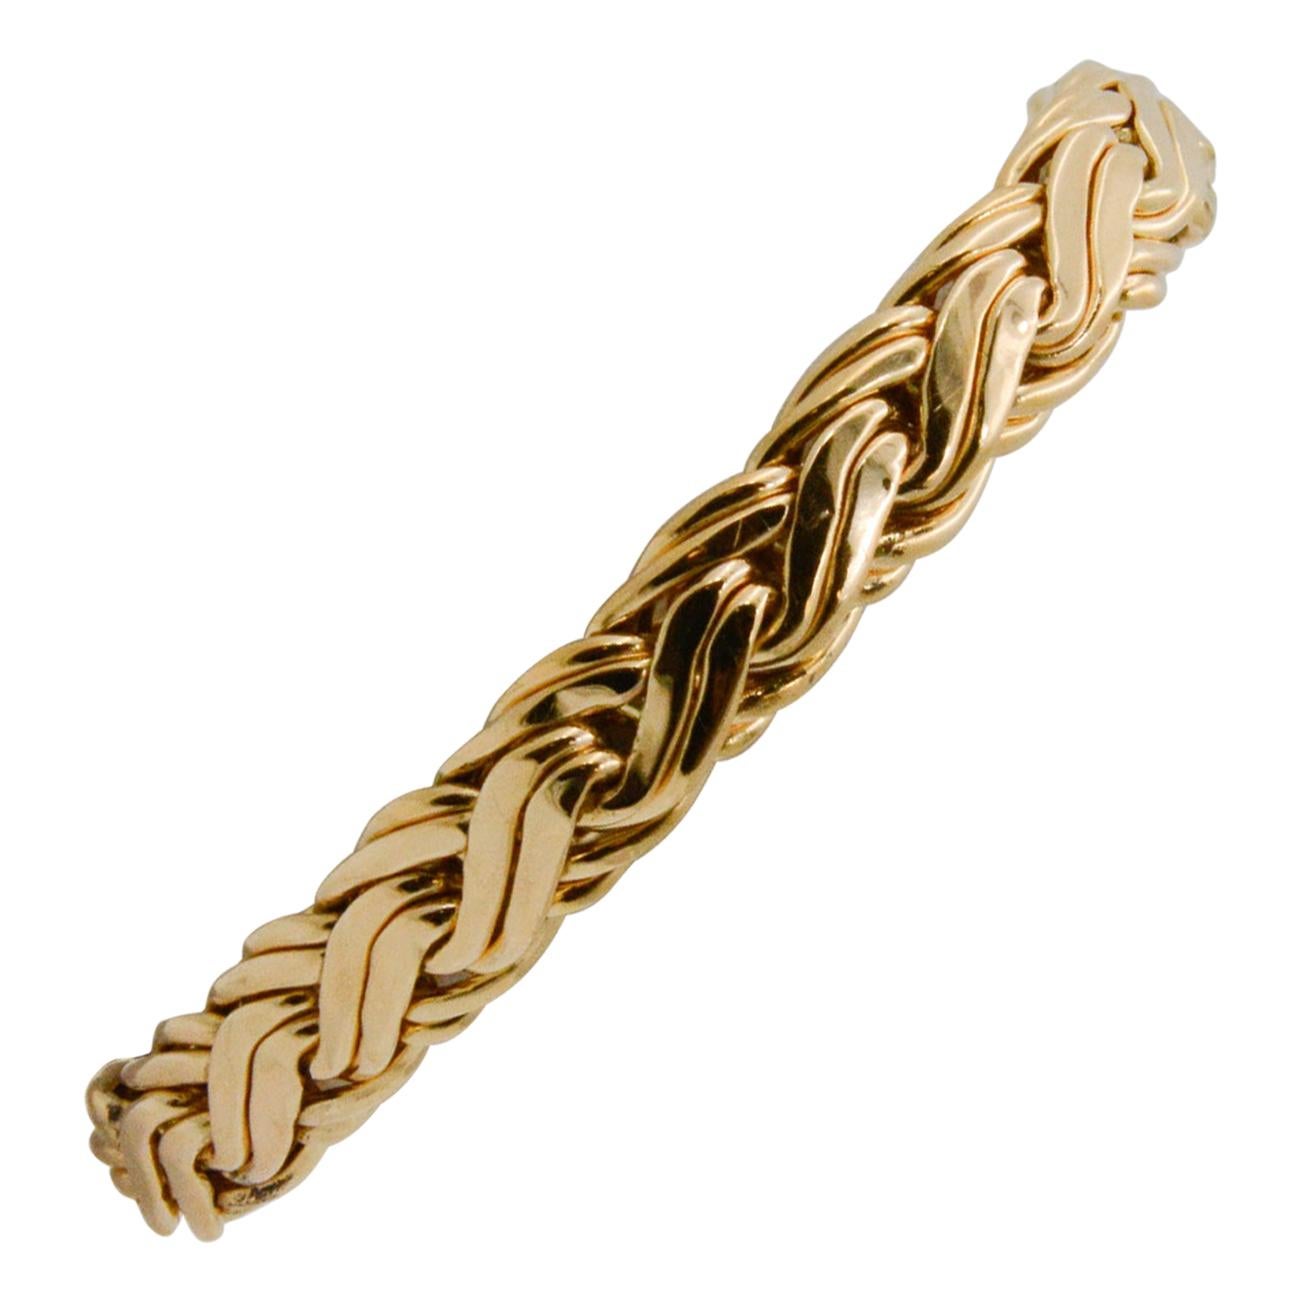 This Tiffany & Co. 14k yellow gold bracelet dates back to the 1940s. It has an elegant Byzantine a pattern and measured 9.6mm wide and 7.5